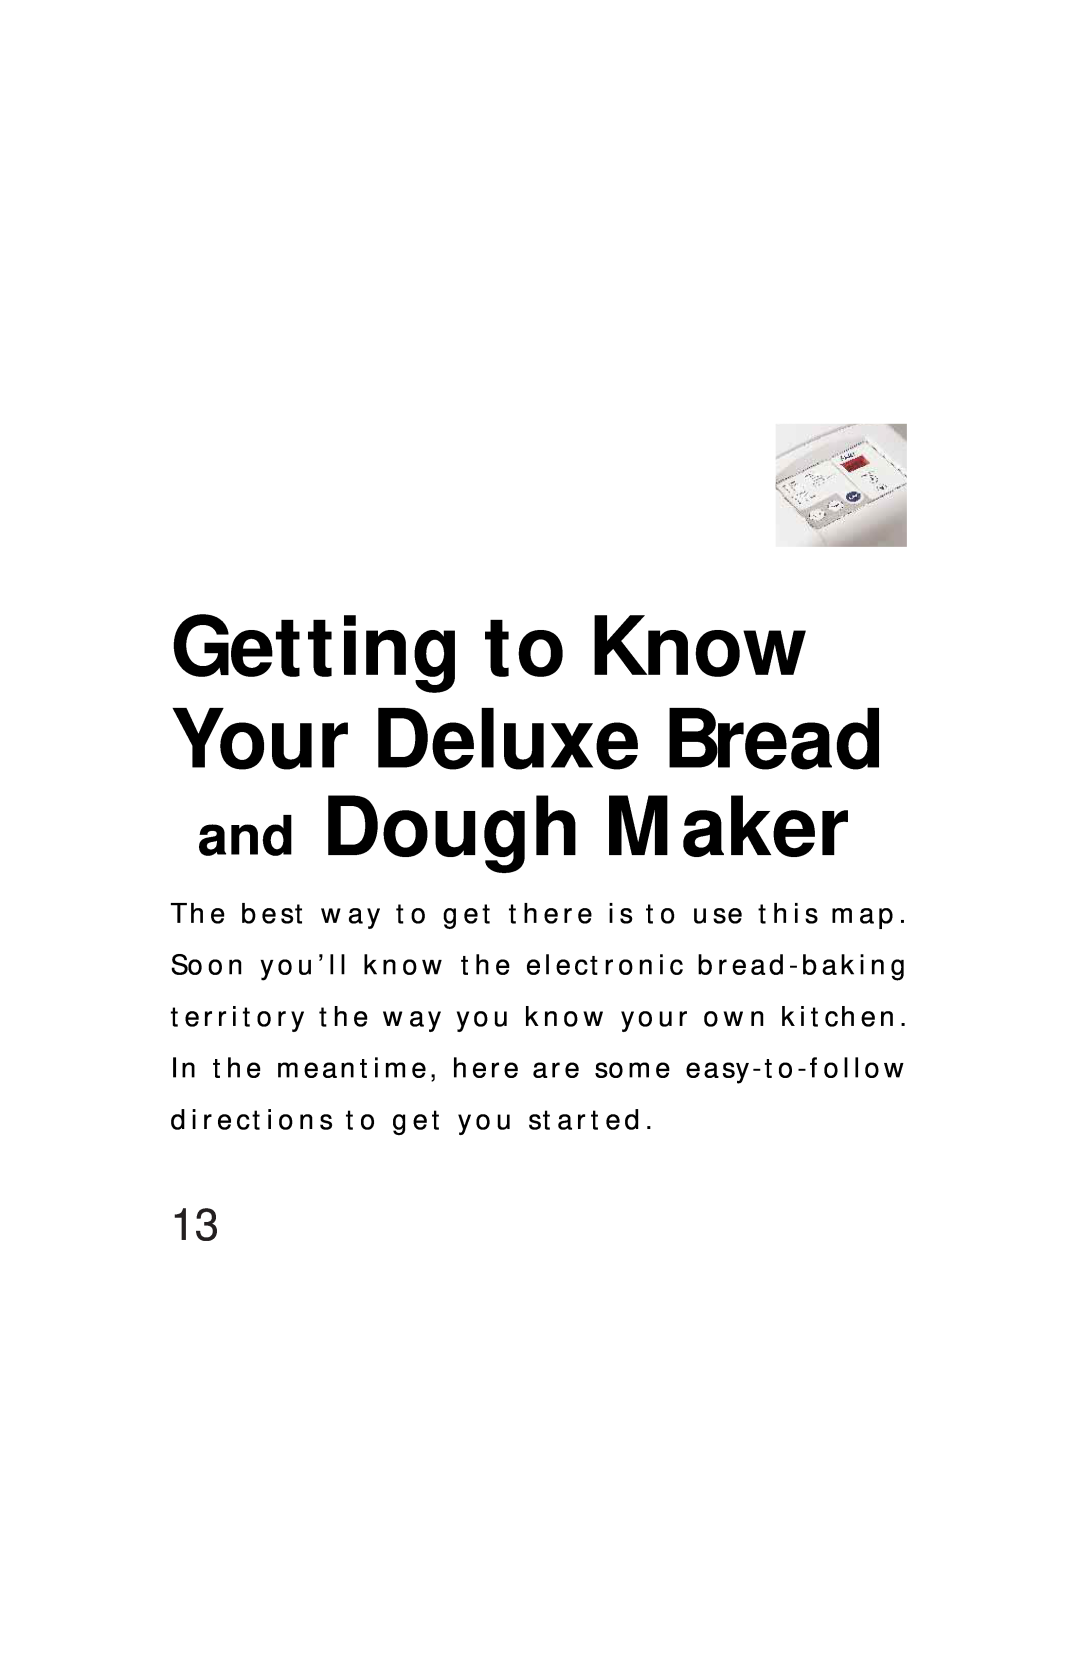 Oster Bread & Dough Maker manual Getting to Know Your Deluxe Bread and Dough Maker 